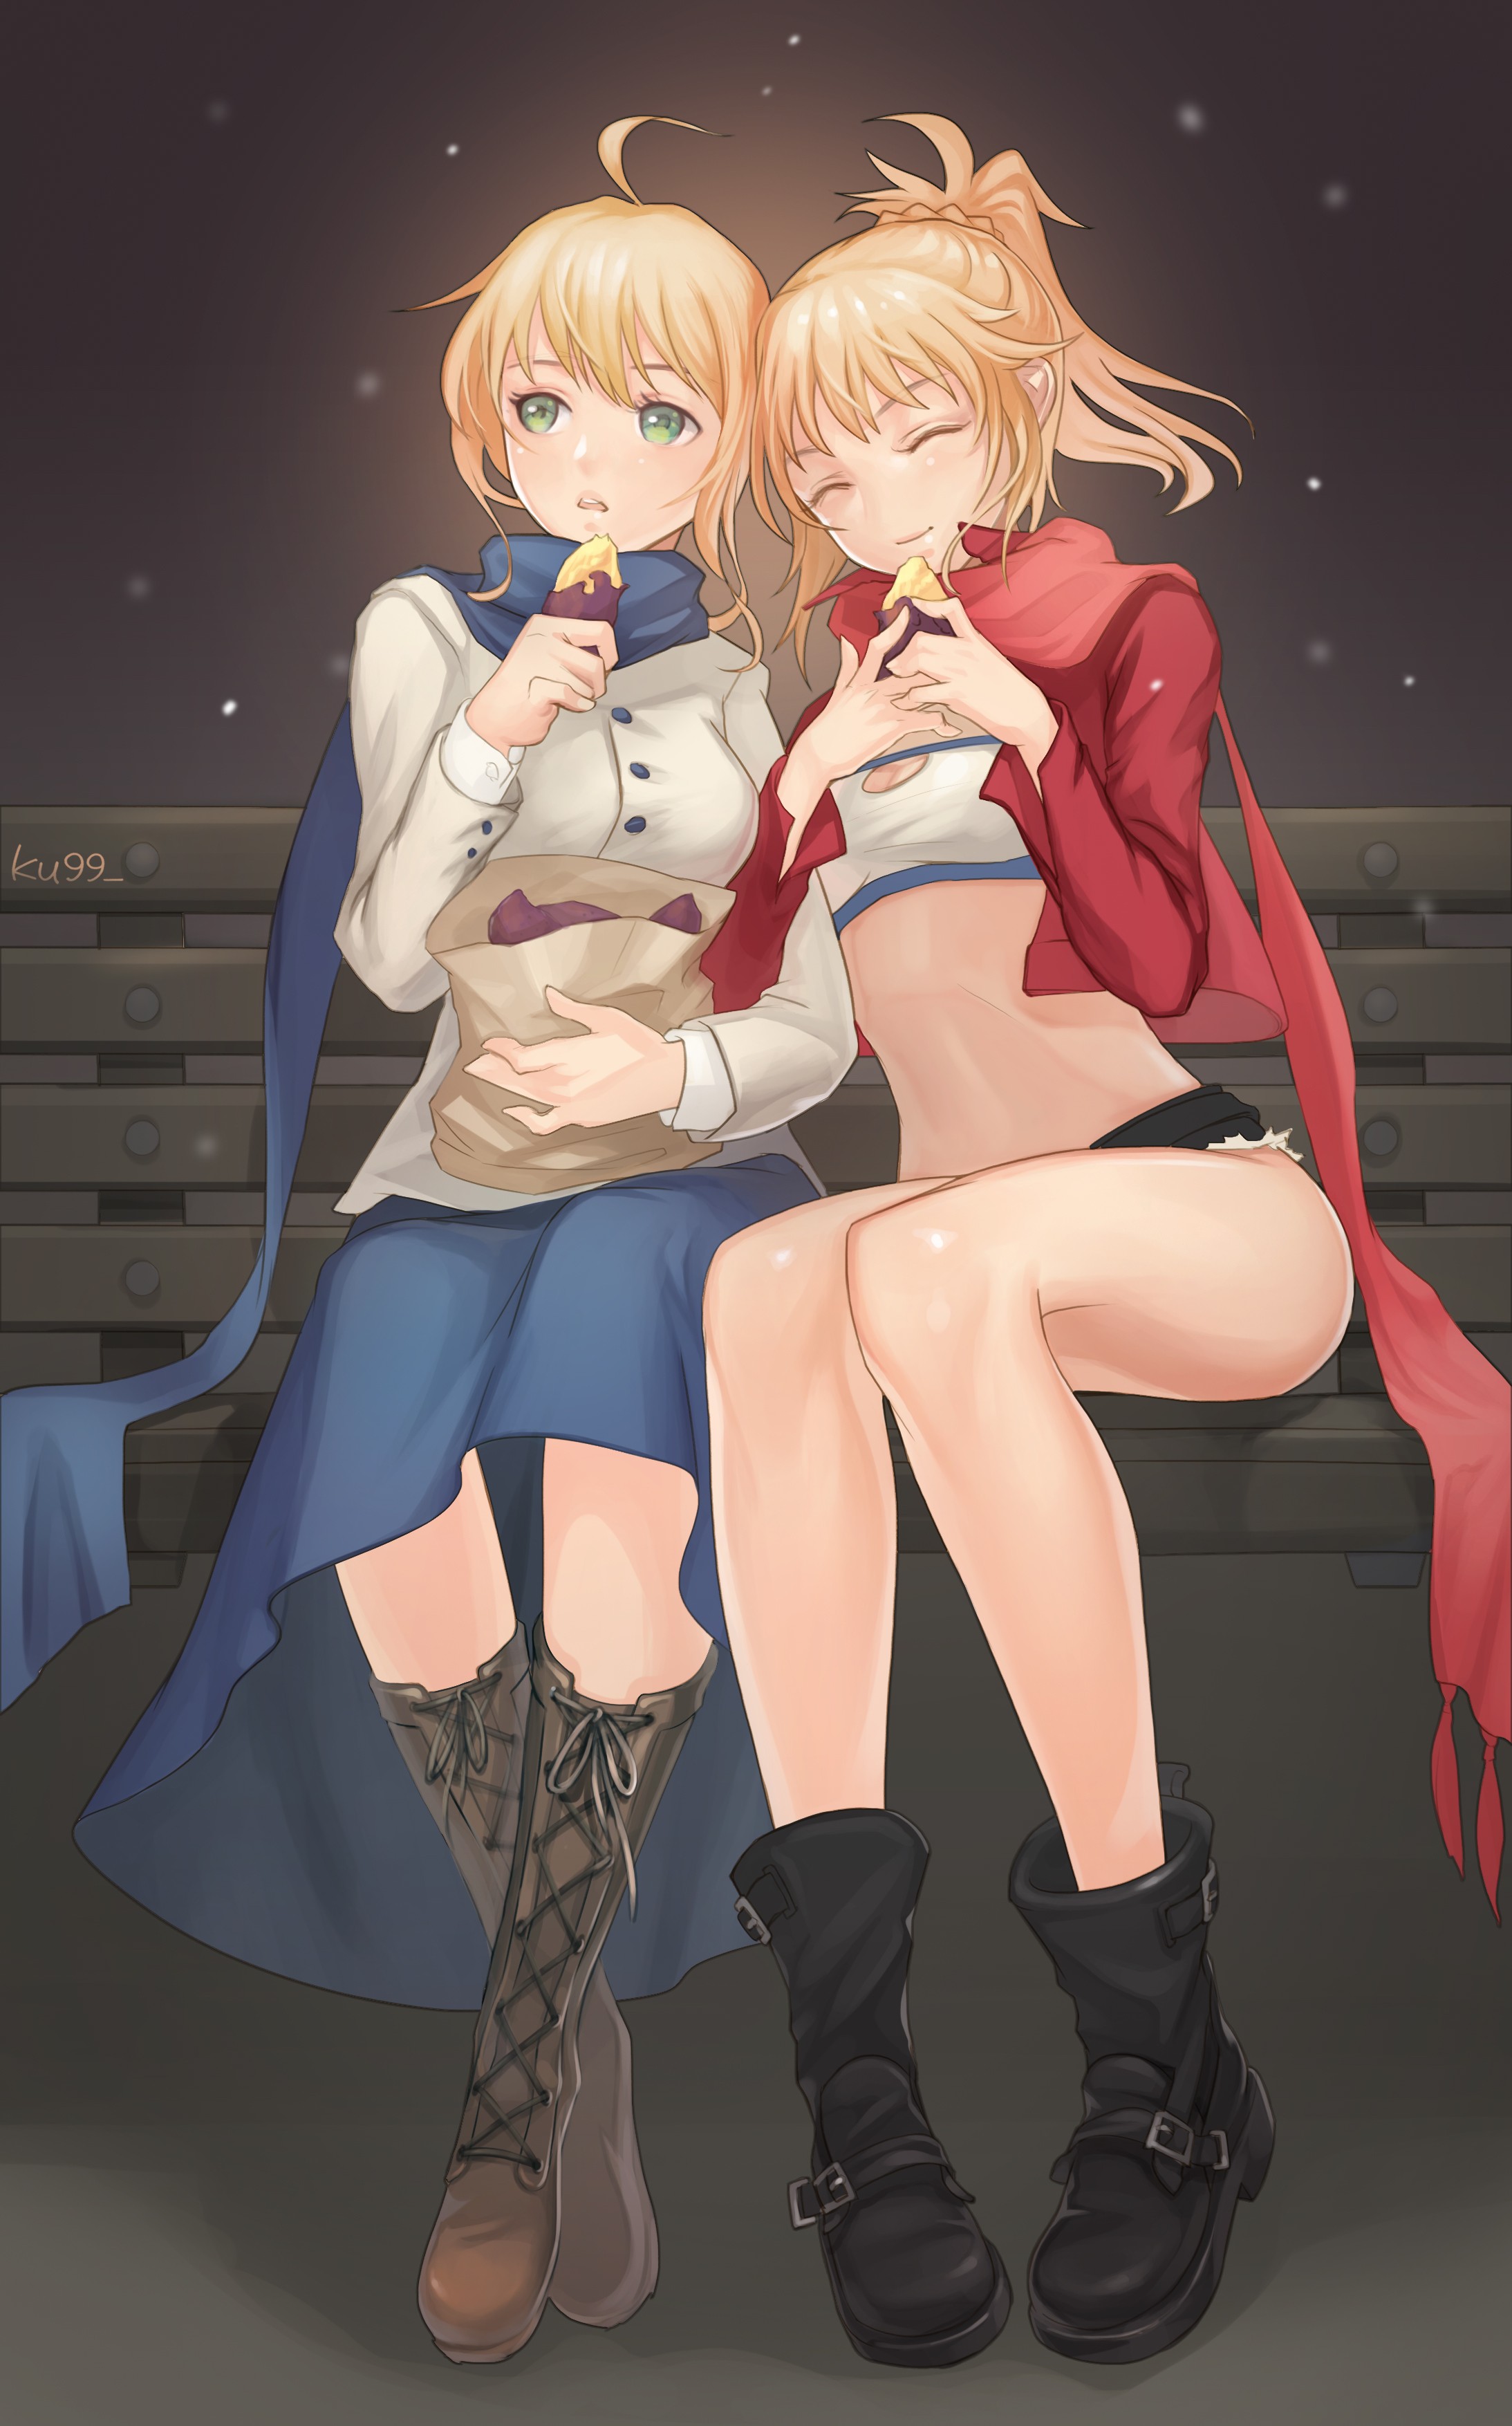 Anime 2187x3508 cleavage Fate/Grand Order Fate/Stay Night Saber Mordred (Fate/Apocrypha) Fate series Artoria Pendragon Ku99 anime girls bench sitting blonde green eyes scarf anime girls eating